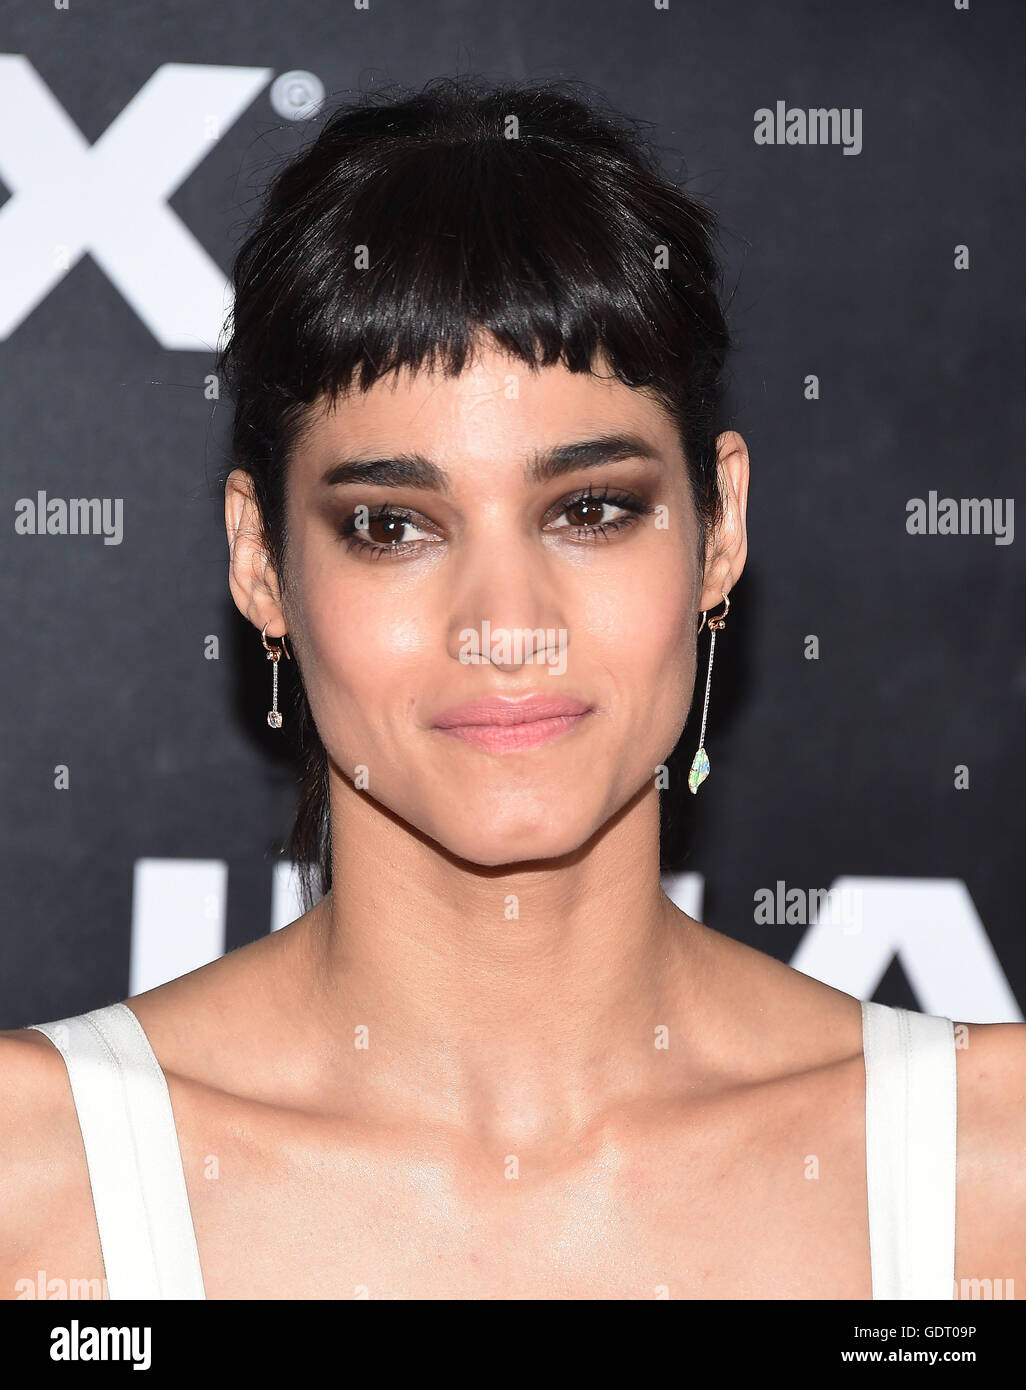 San Diego, California, USA. 20th July, 2016. Sofia Boutella arrives for the premiere of the film 'Star Trek Beyond' at the Embarcadero Marina Park. Credit:  Lisa O'Connor/ZUMA Wire/Alamy Live News Stock Photo